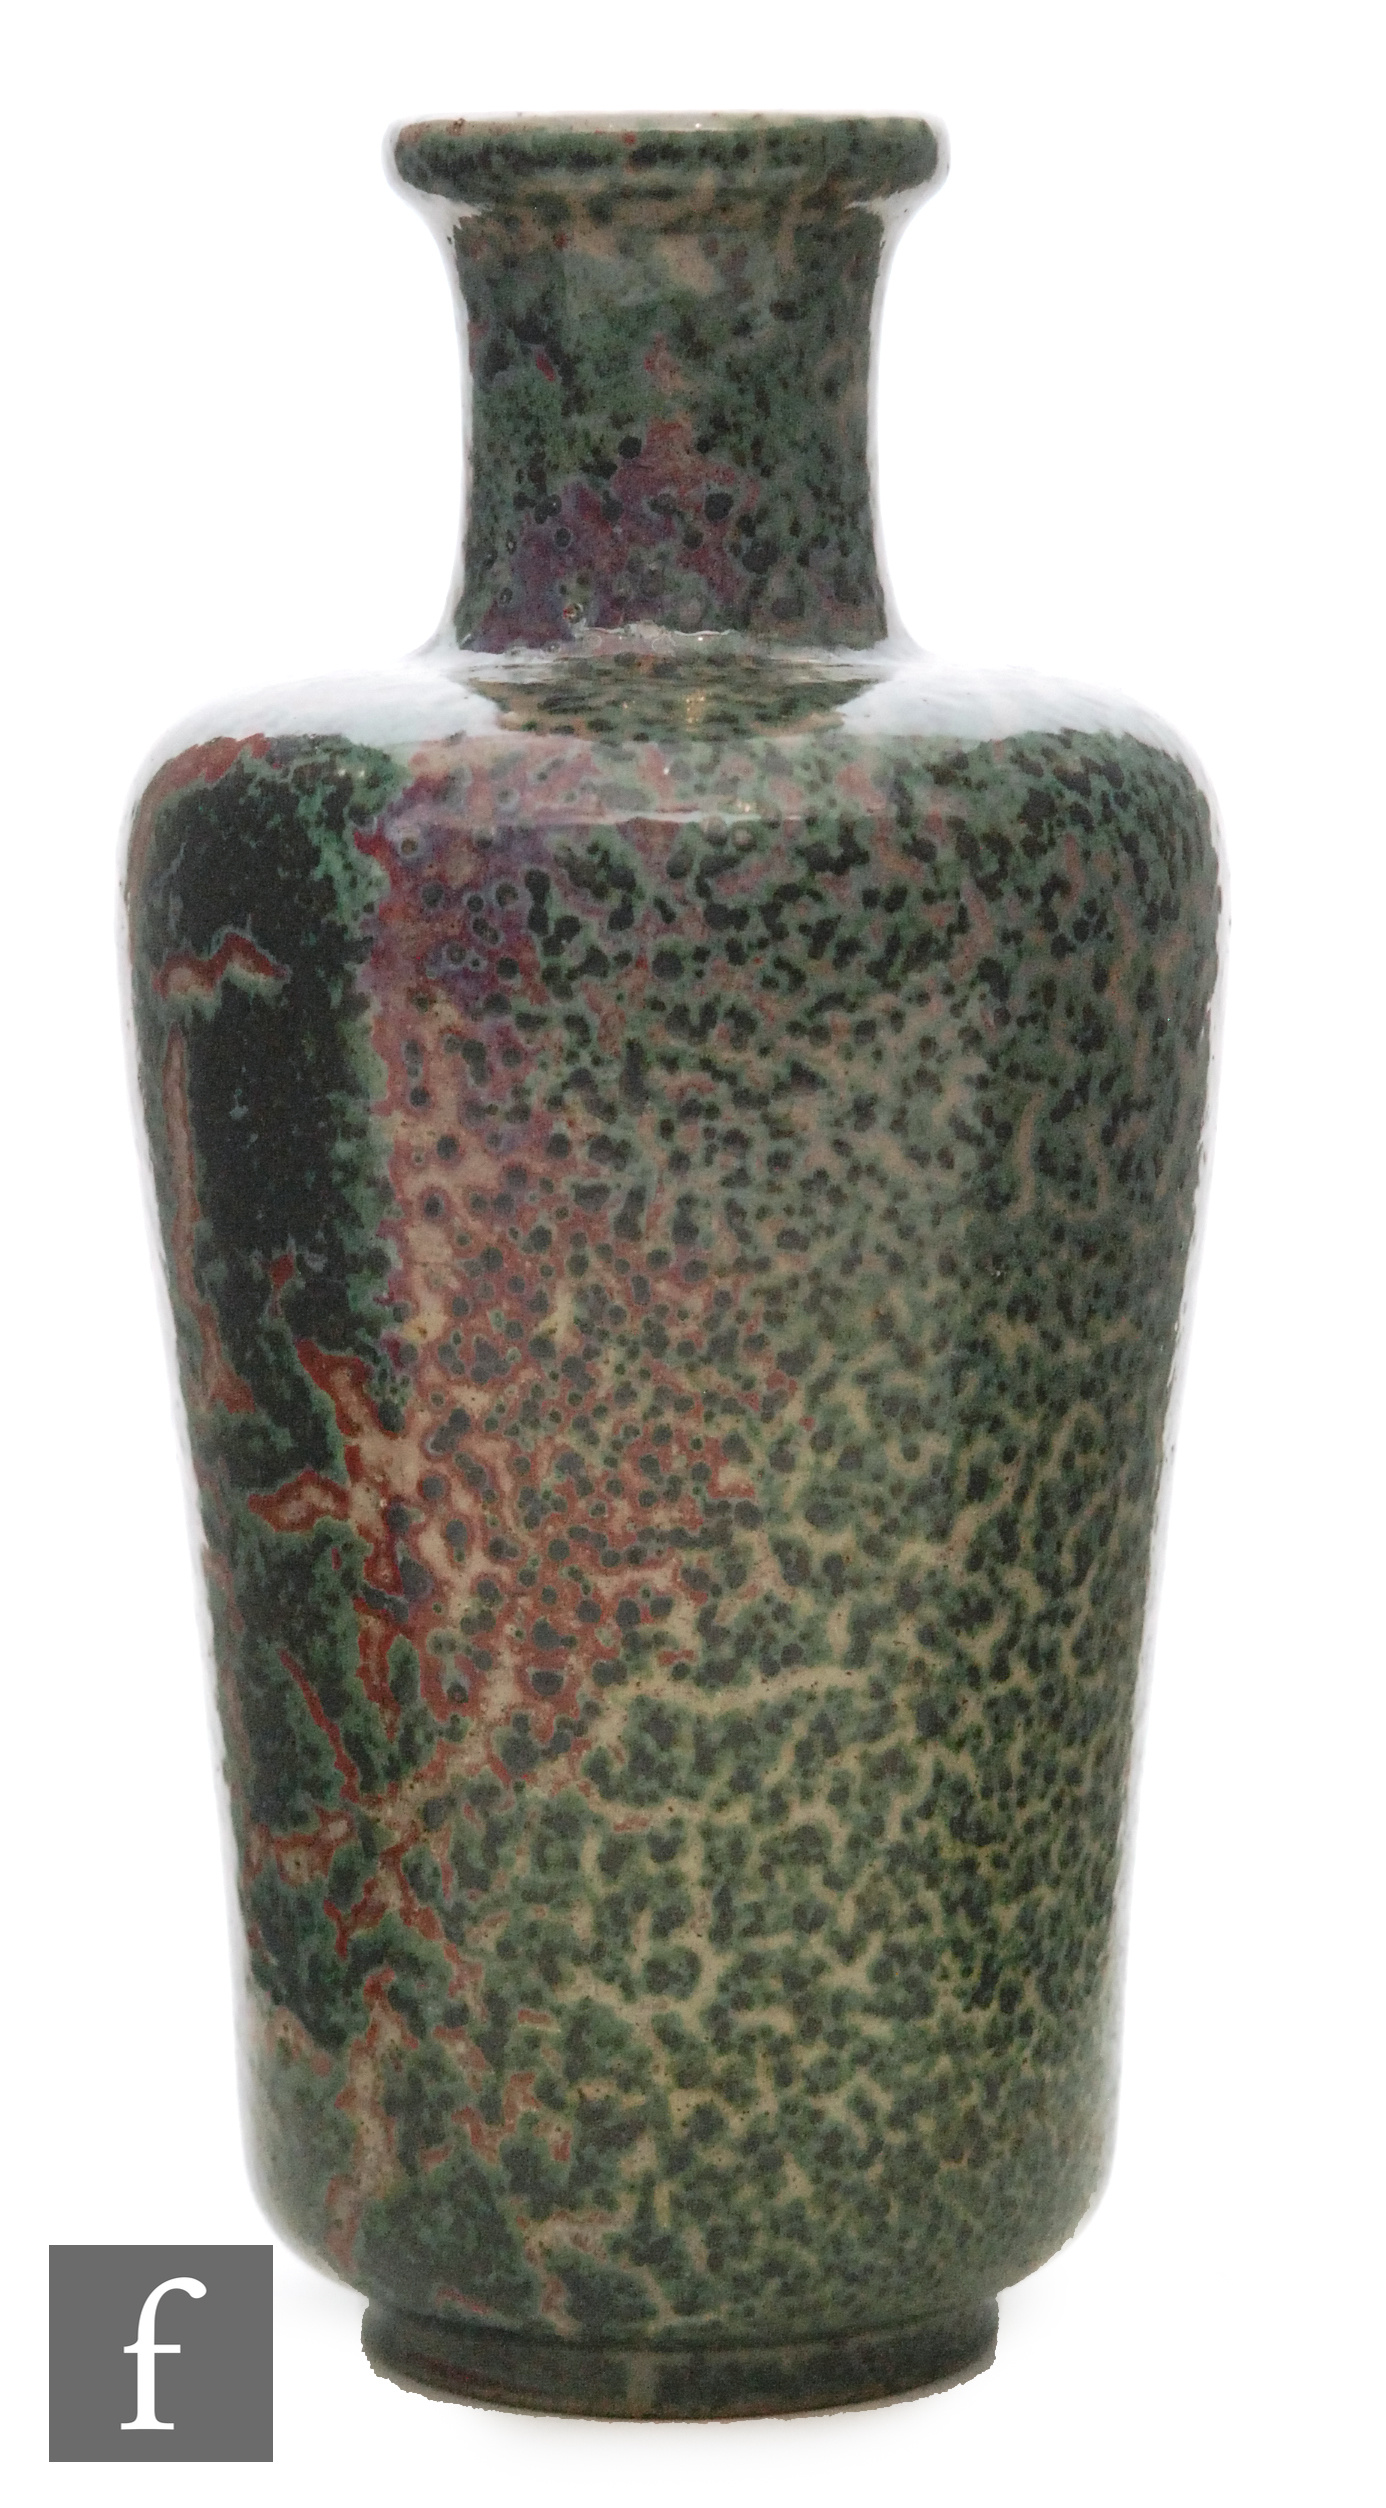 Ruskin Pottery - A high fired vase of shouldered form with a flared neck decorated in an all over